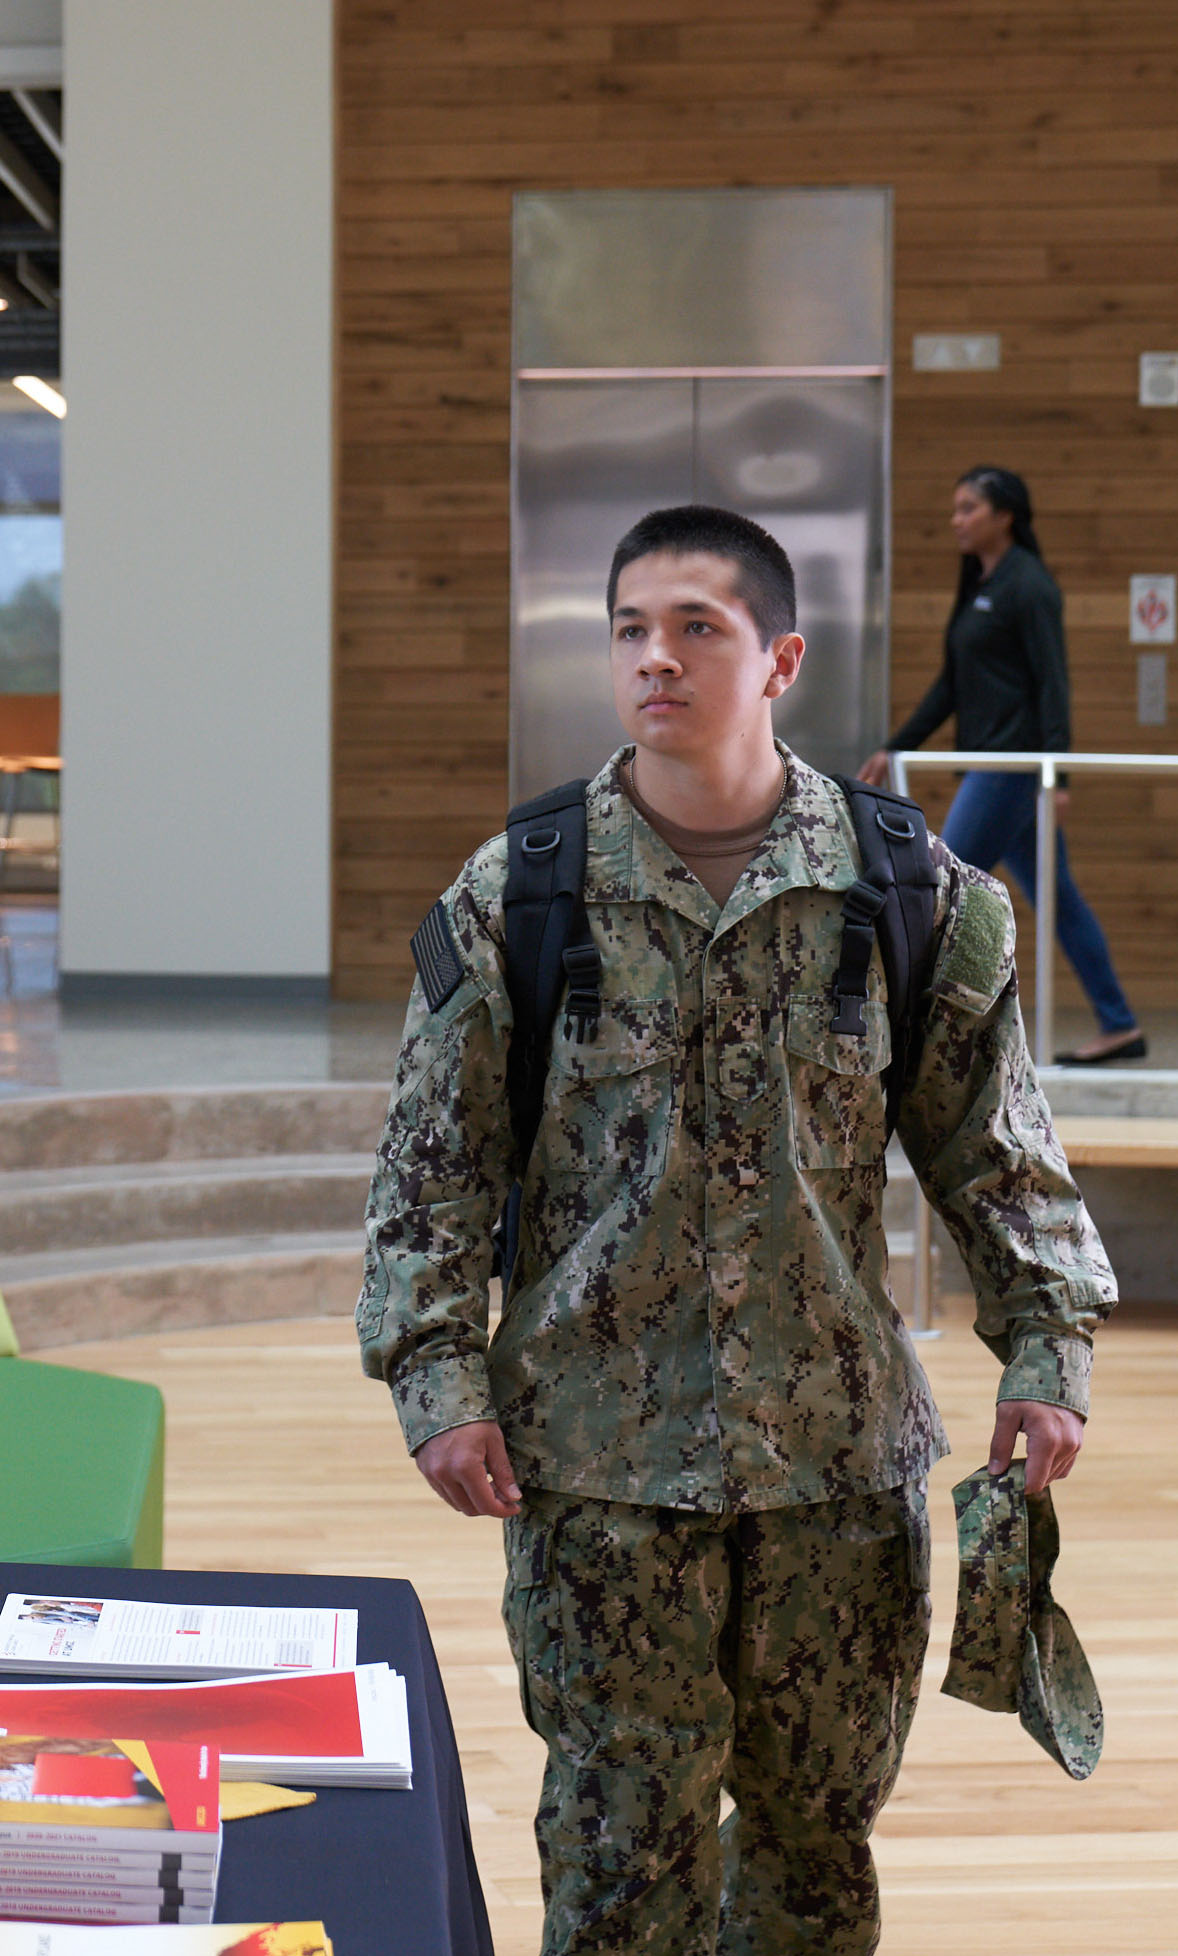 A person in uniform walking with a backpack.